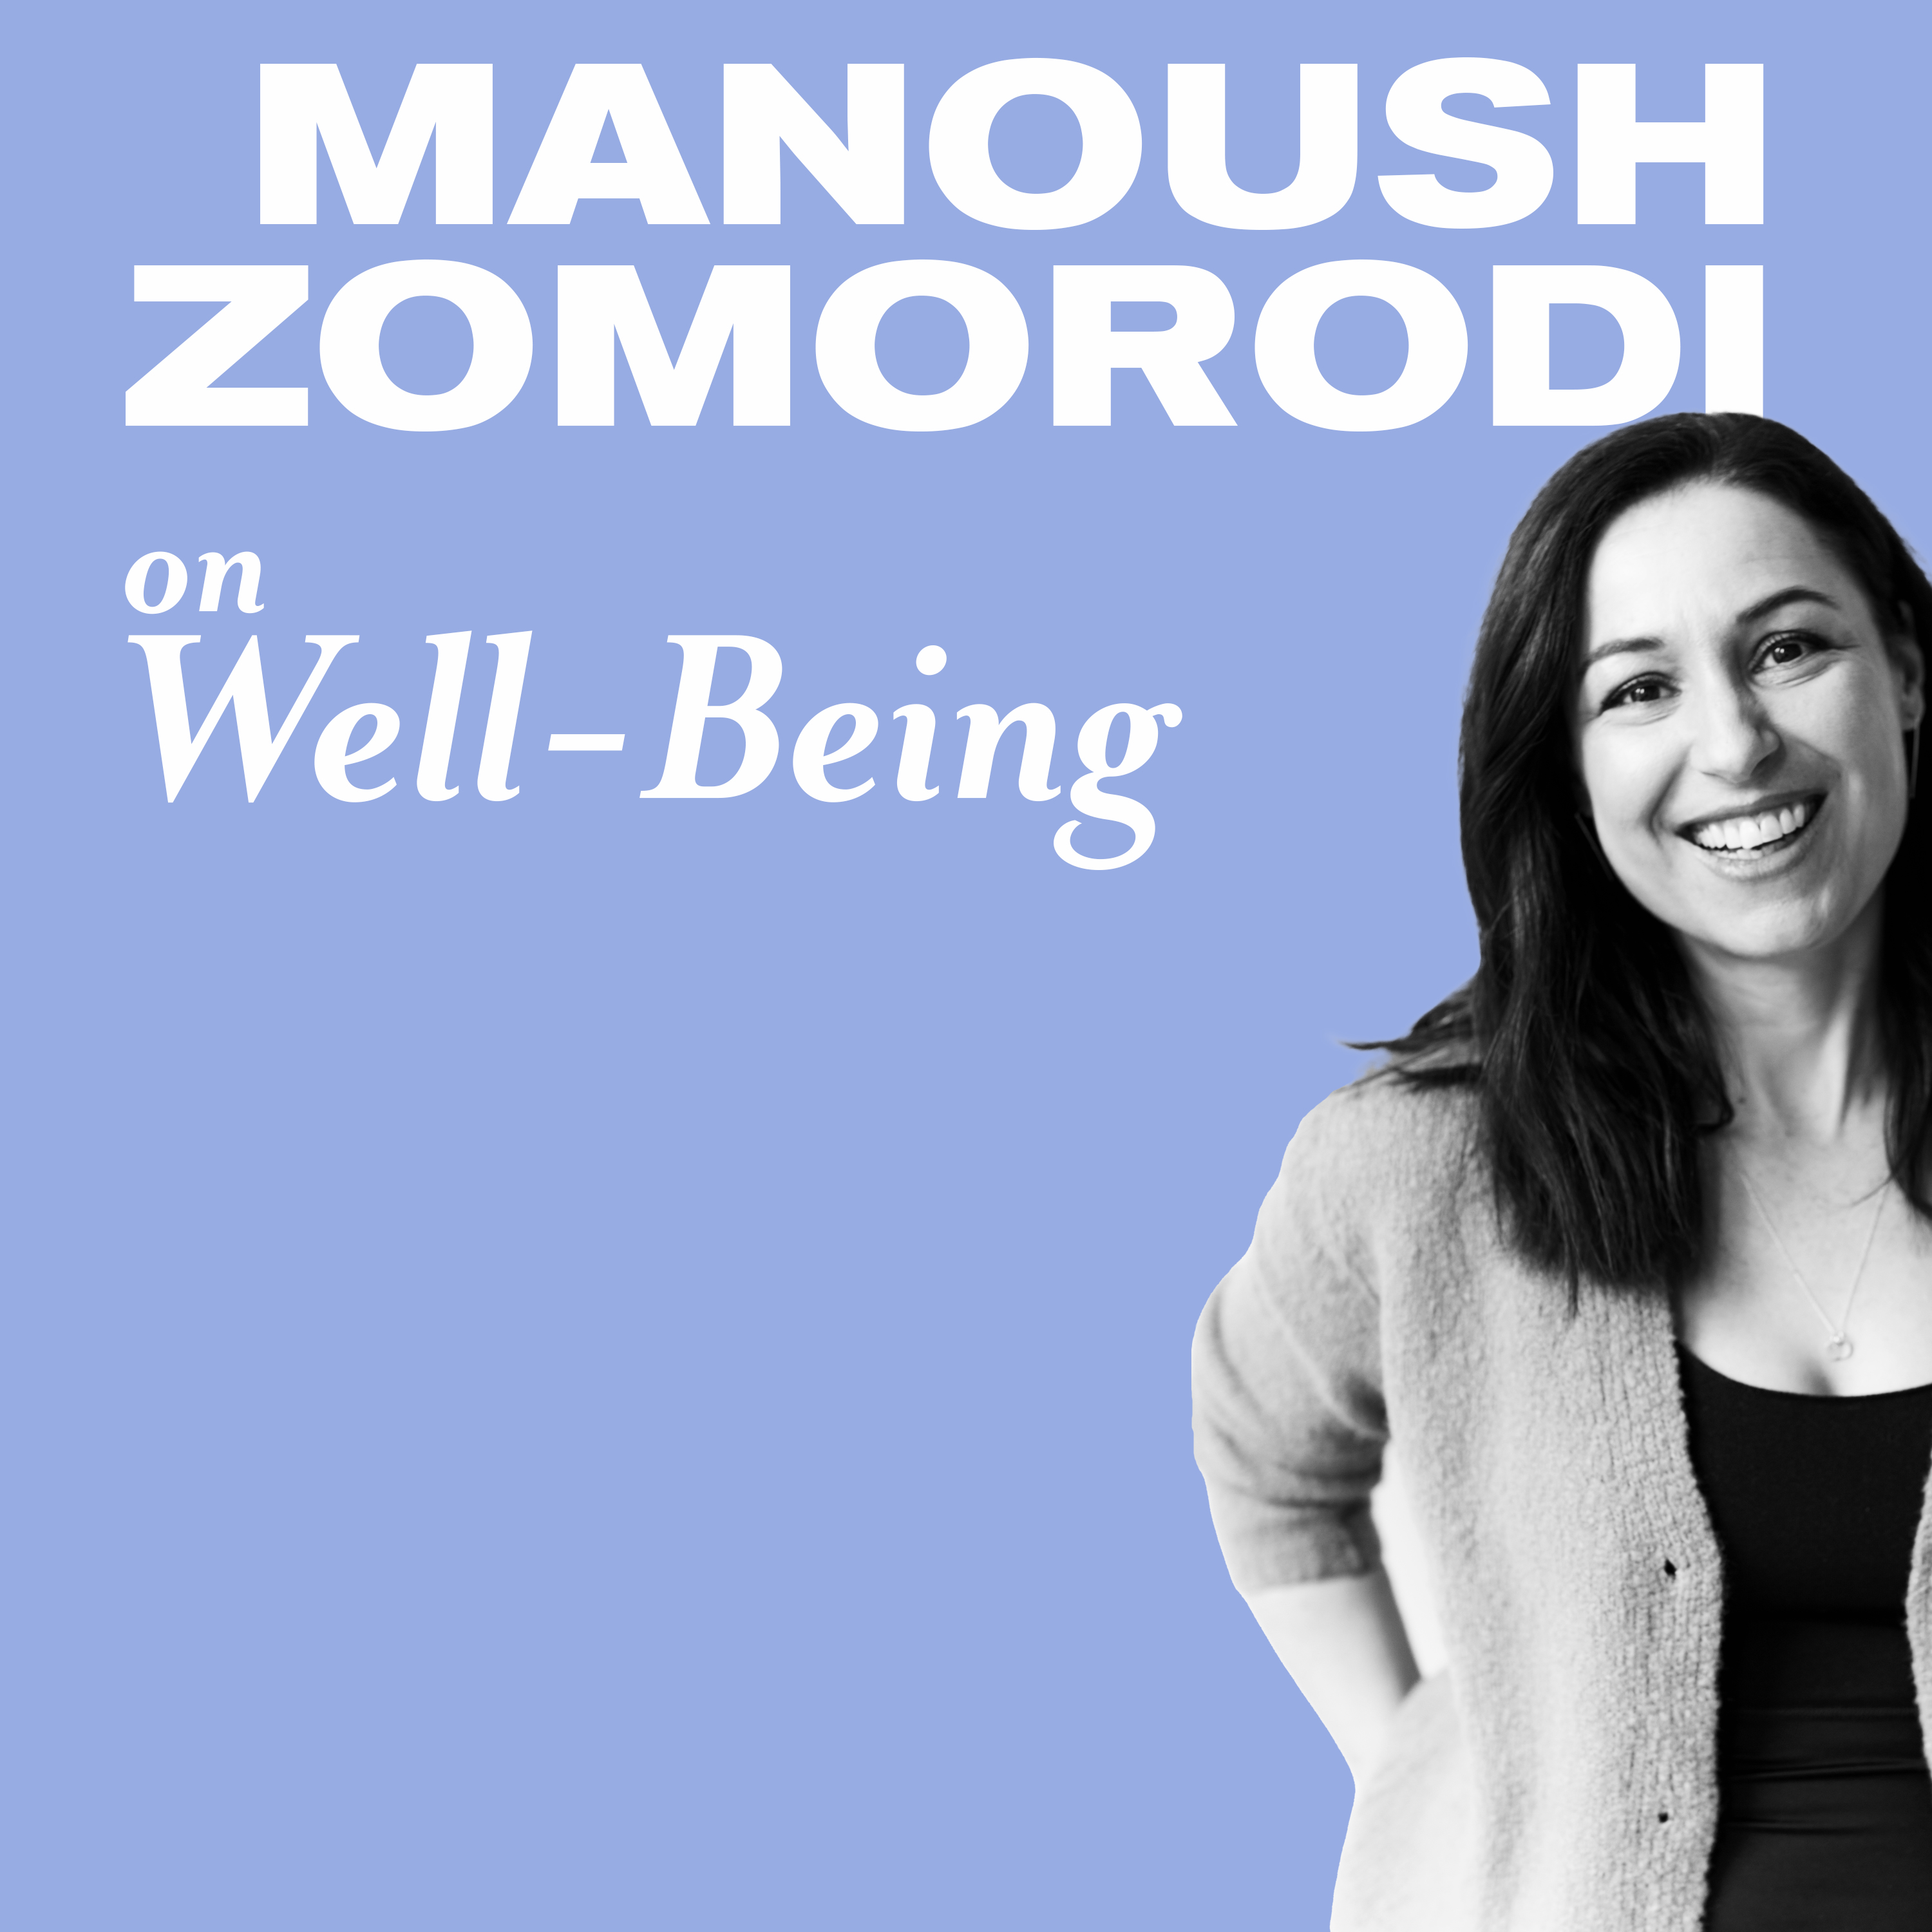 Manoush Zomorodi on WellBeing and Self Care